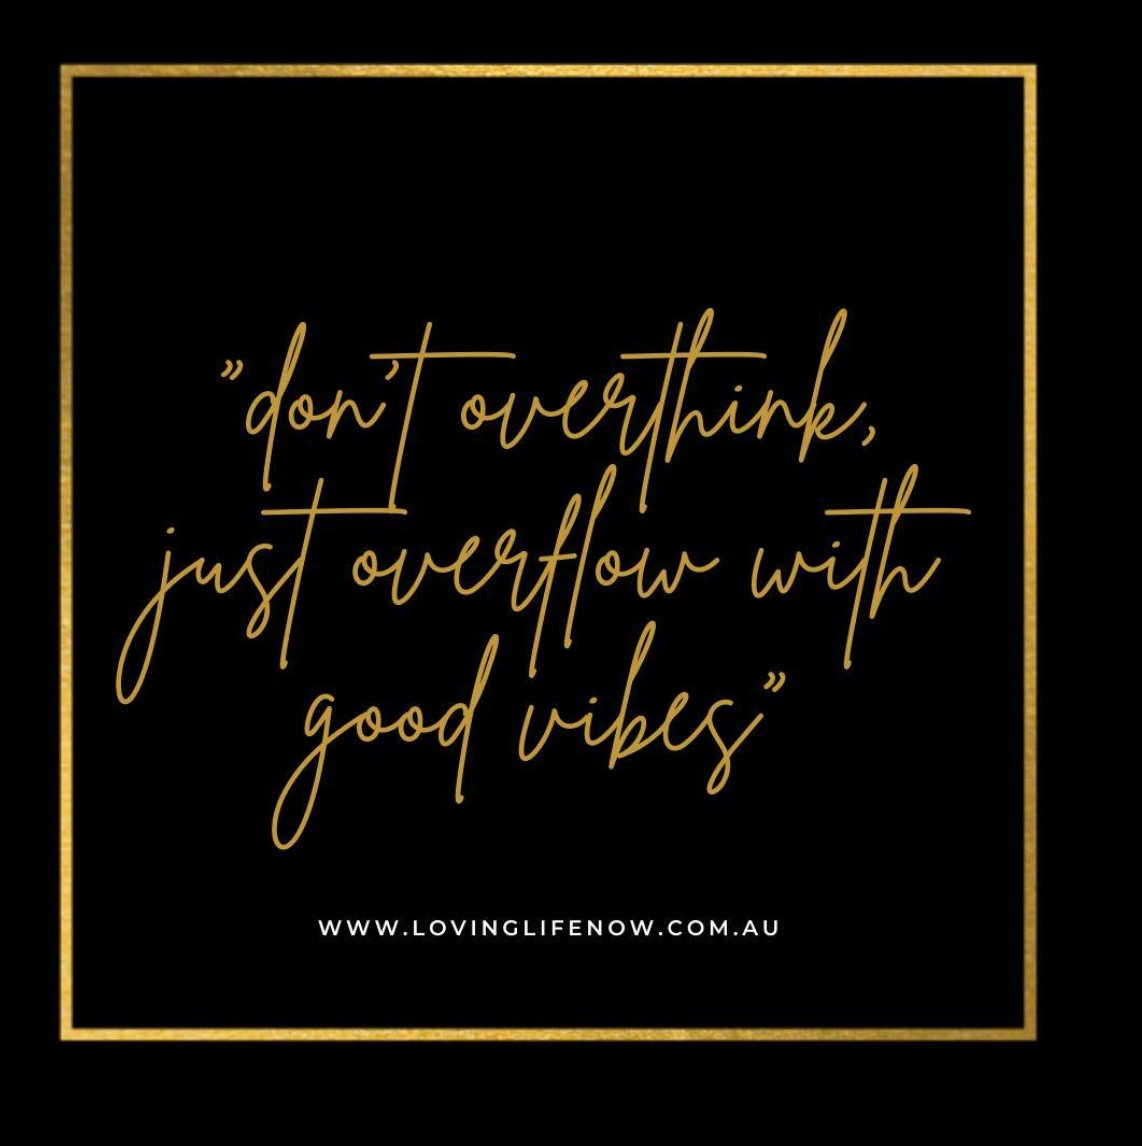 Don't overthink, just overflow with good vibes
-
-
#LivingLovingLife
#OnlineIncomeOpportunity #WorkFromAnywhere #OnlineBusinessSolution
#SimonAndLeeAnne #LifestyleLoveAndBeyond
#LaptopLifestyle #PortableOnlineBusiness
#SimonHaggard #LeeAnneHaggard #LovingLifeNow